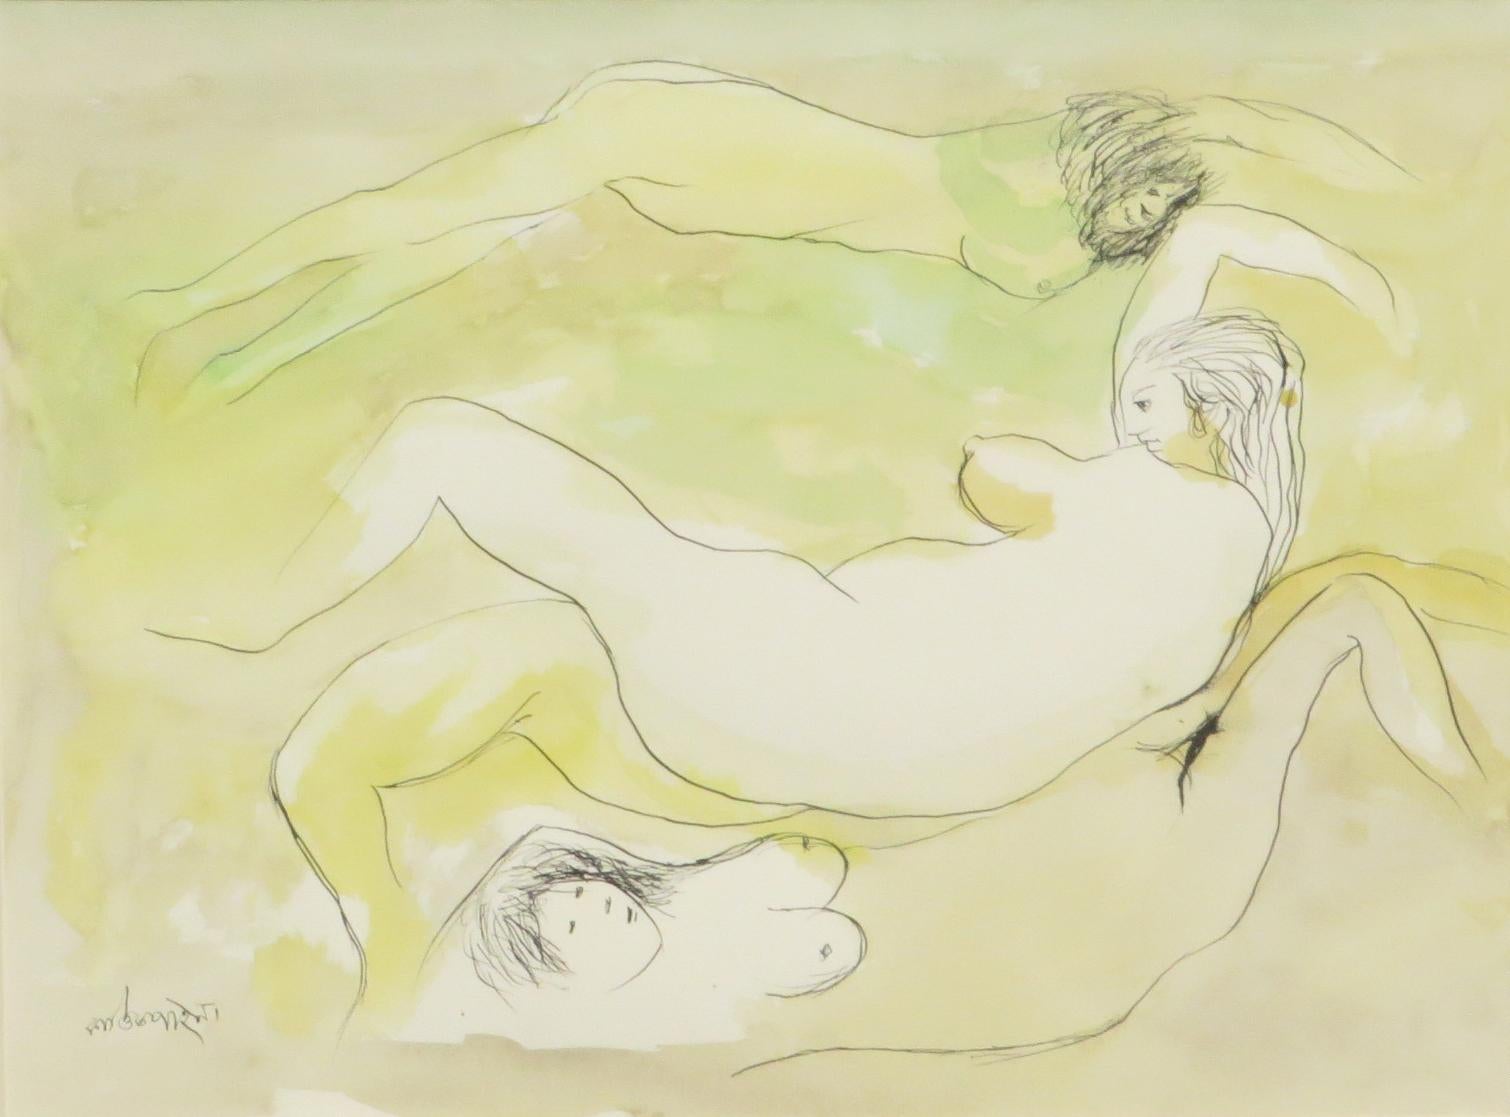 Nude Women, Bathing, Watercolor on paper, Green, Yellow by K. C. Pyne 